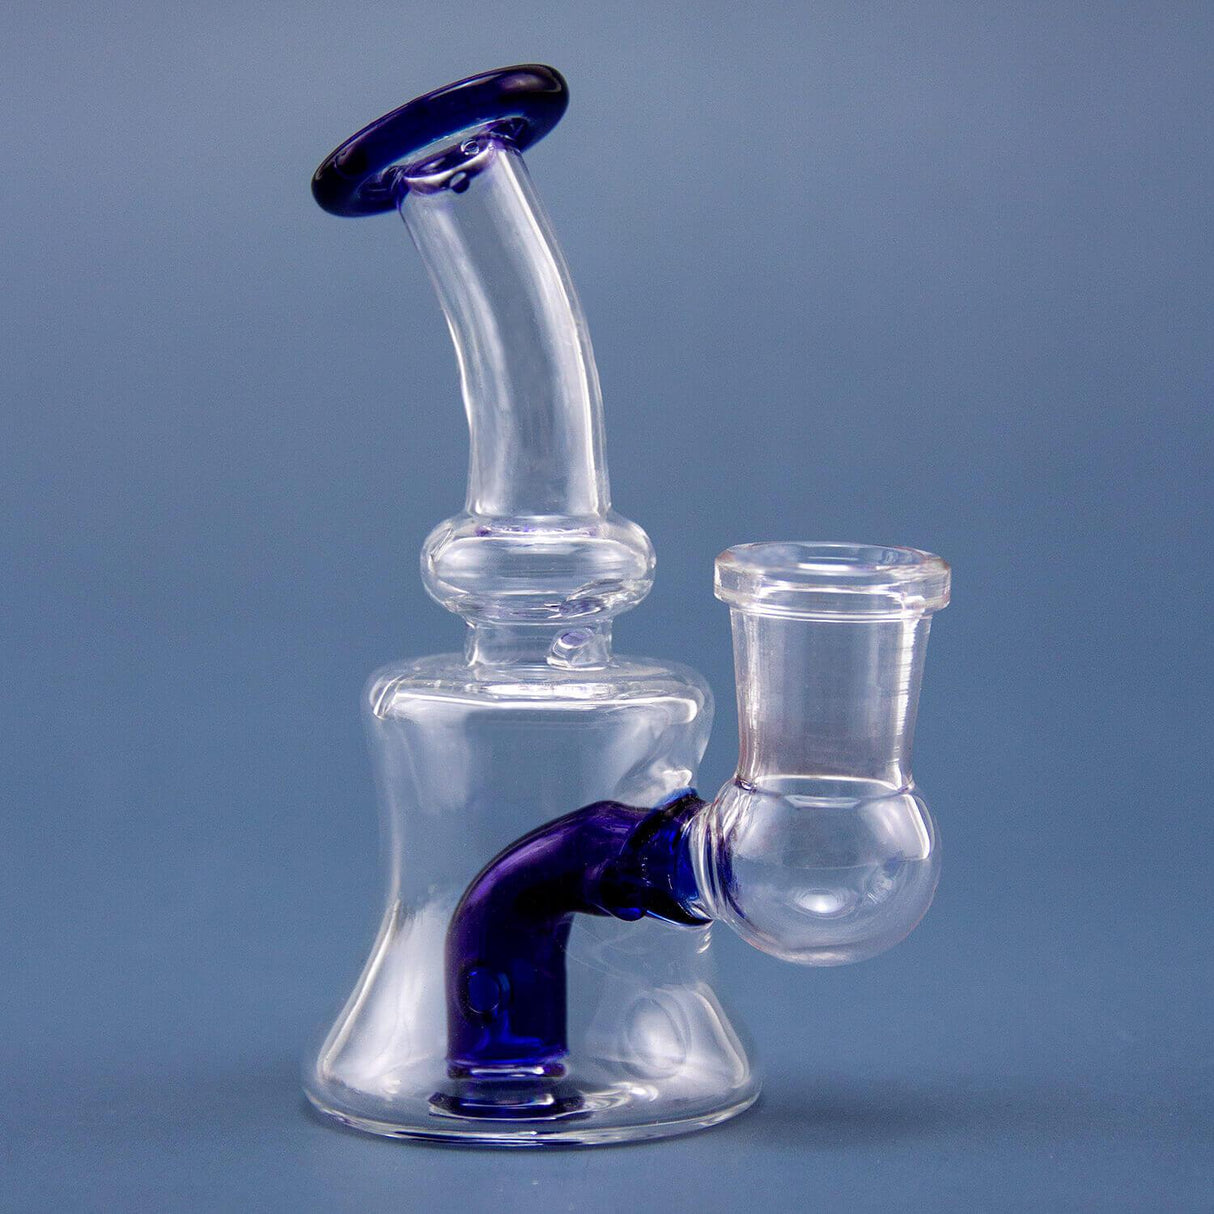 PILOT DIARY Mini Rig 4" Glass Water Pipe - Angled Side View with Blue Accents